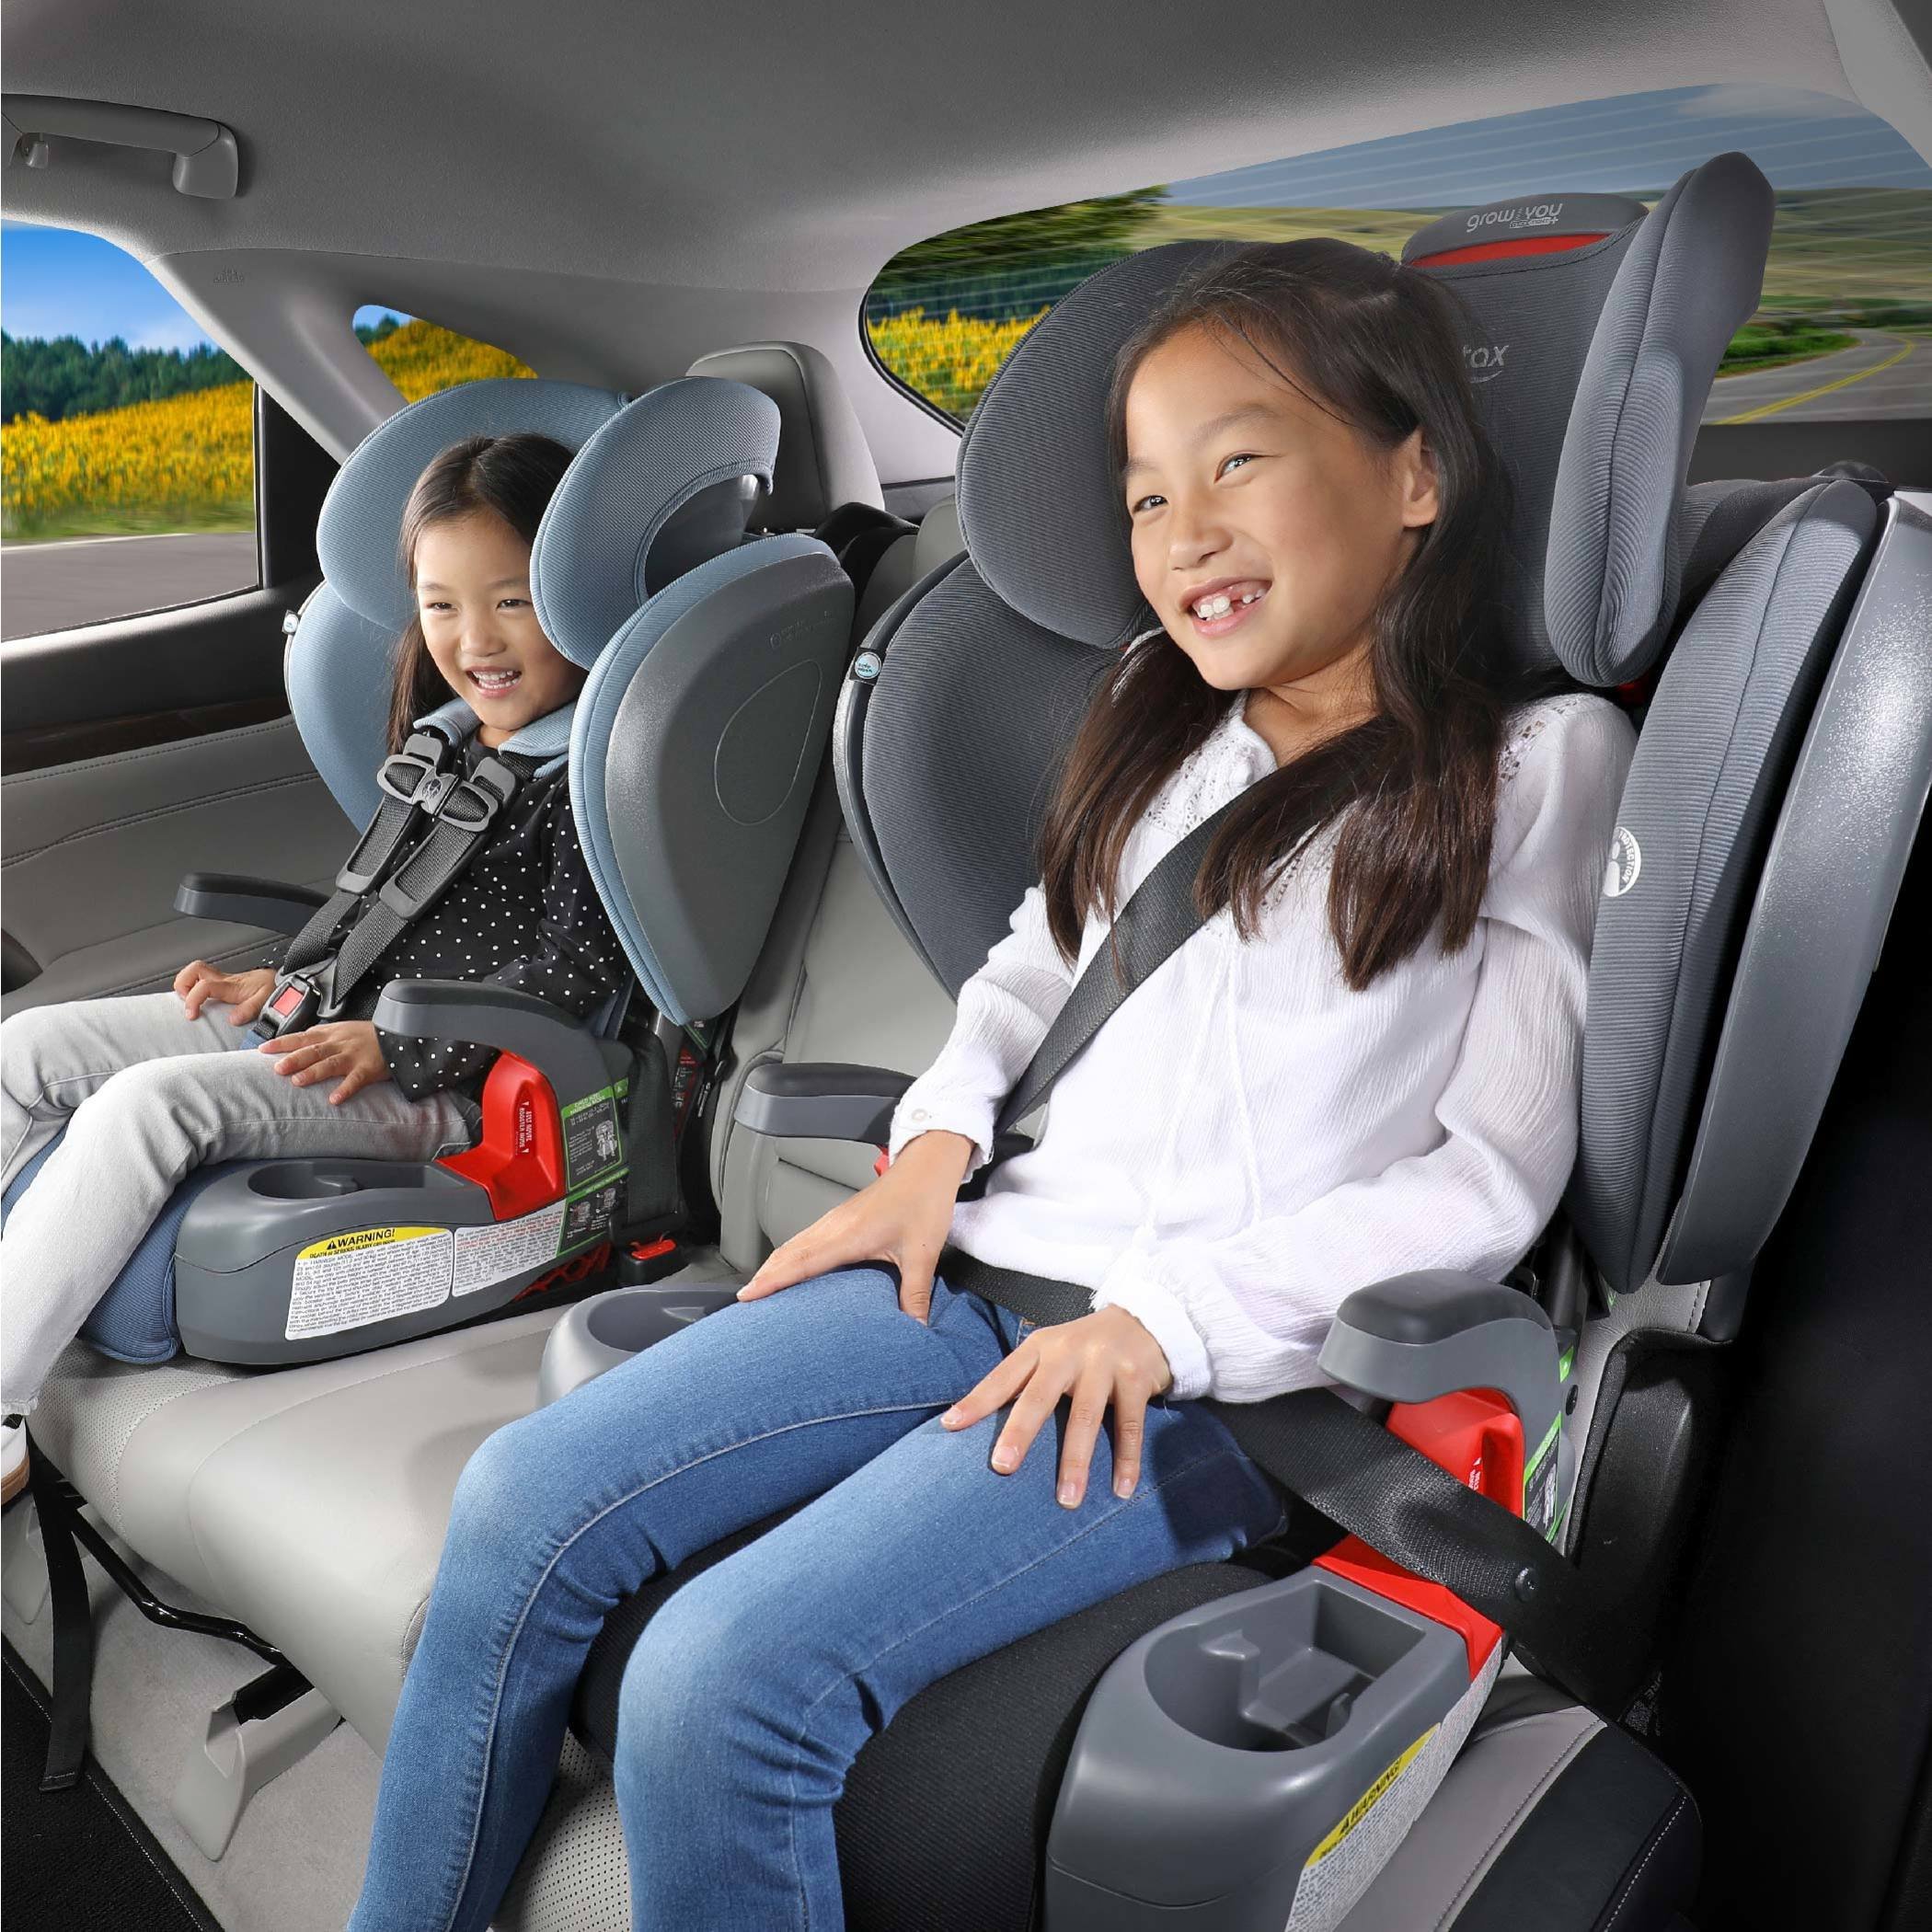 Children riding in car seat, one in booster mode and one in harness mode